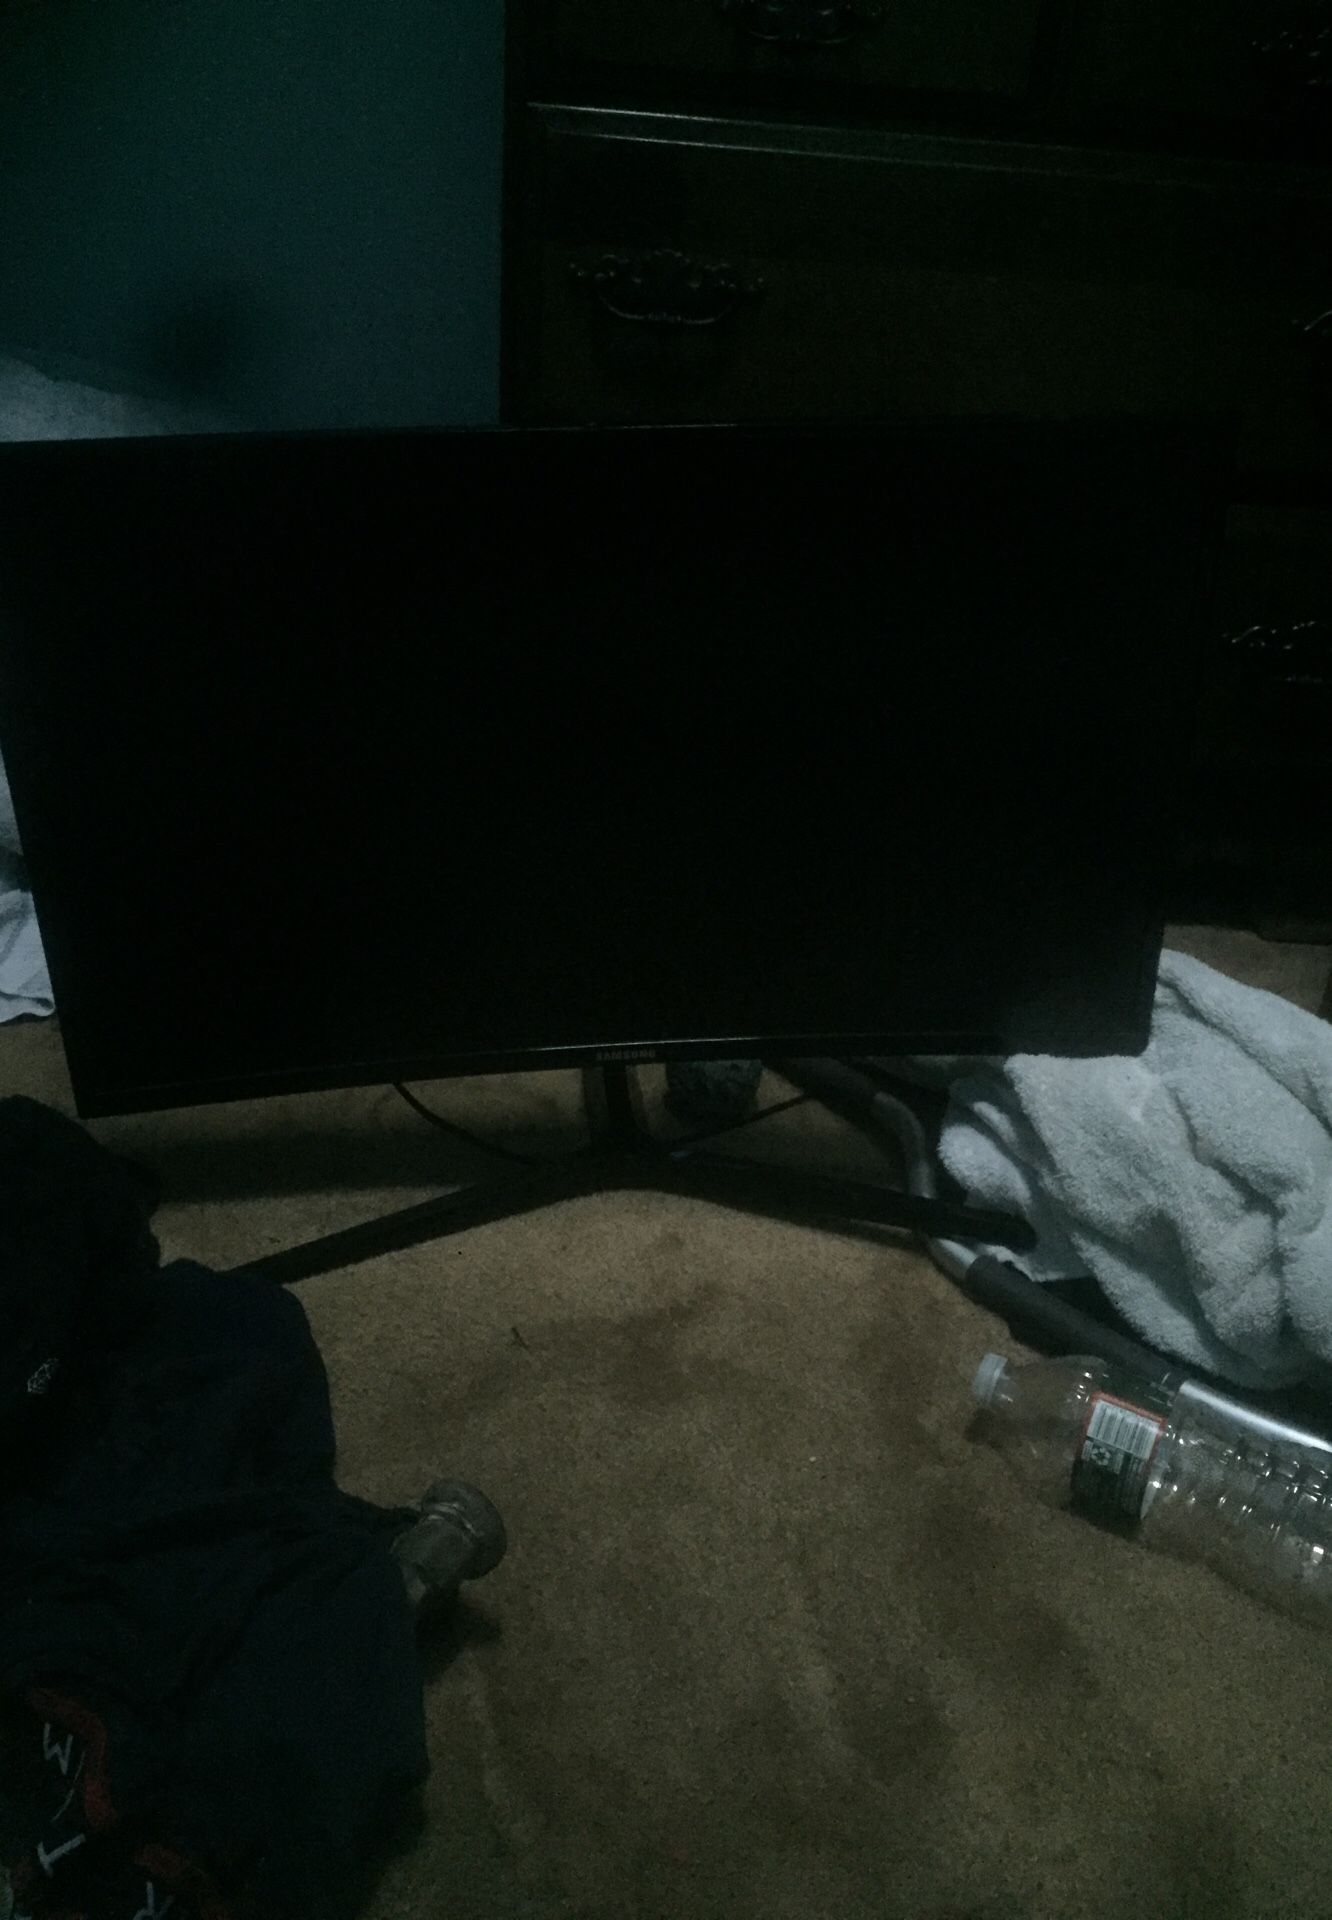 Samsung 27 inch curved monitor